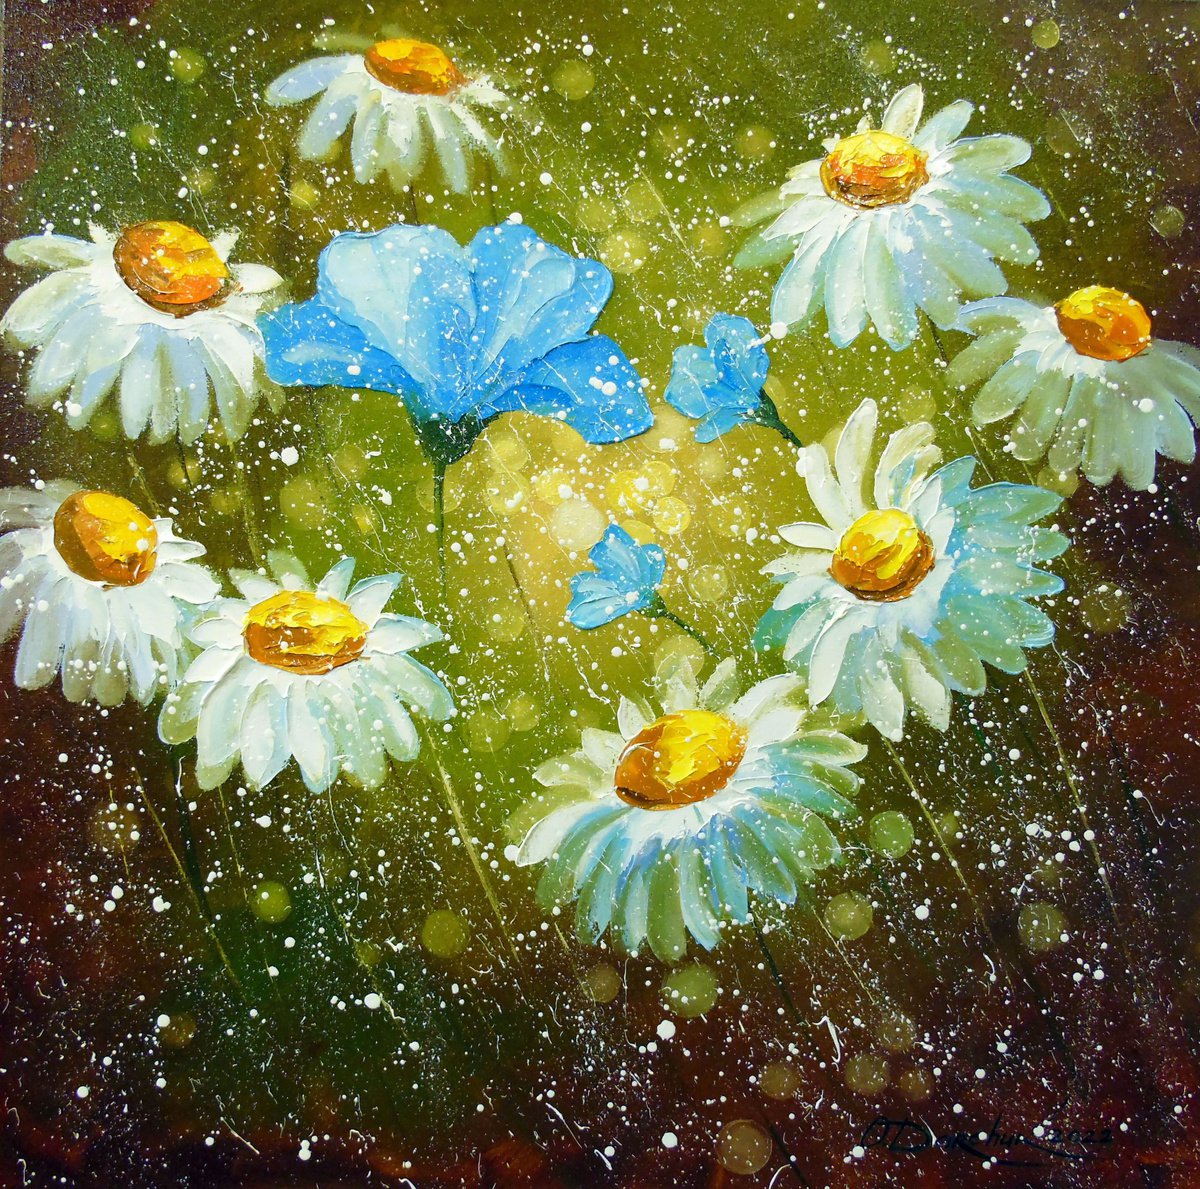 Daisies in the field by Olha Darchuk